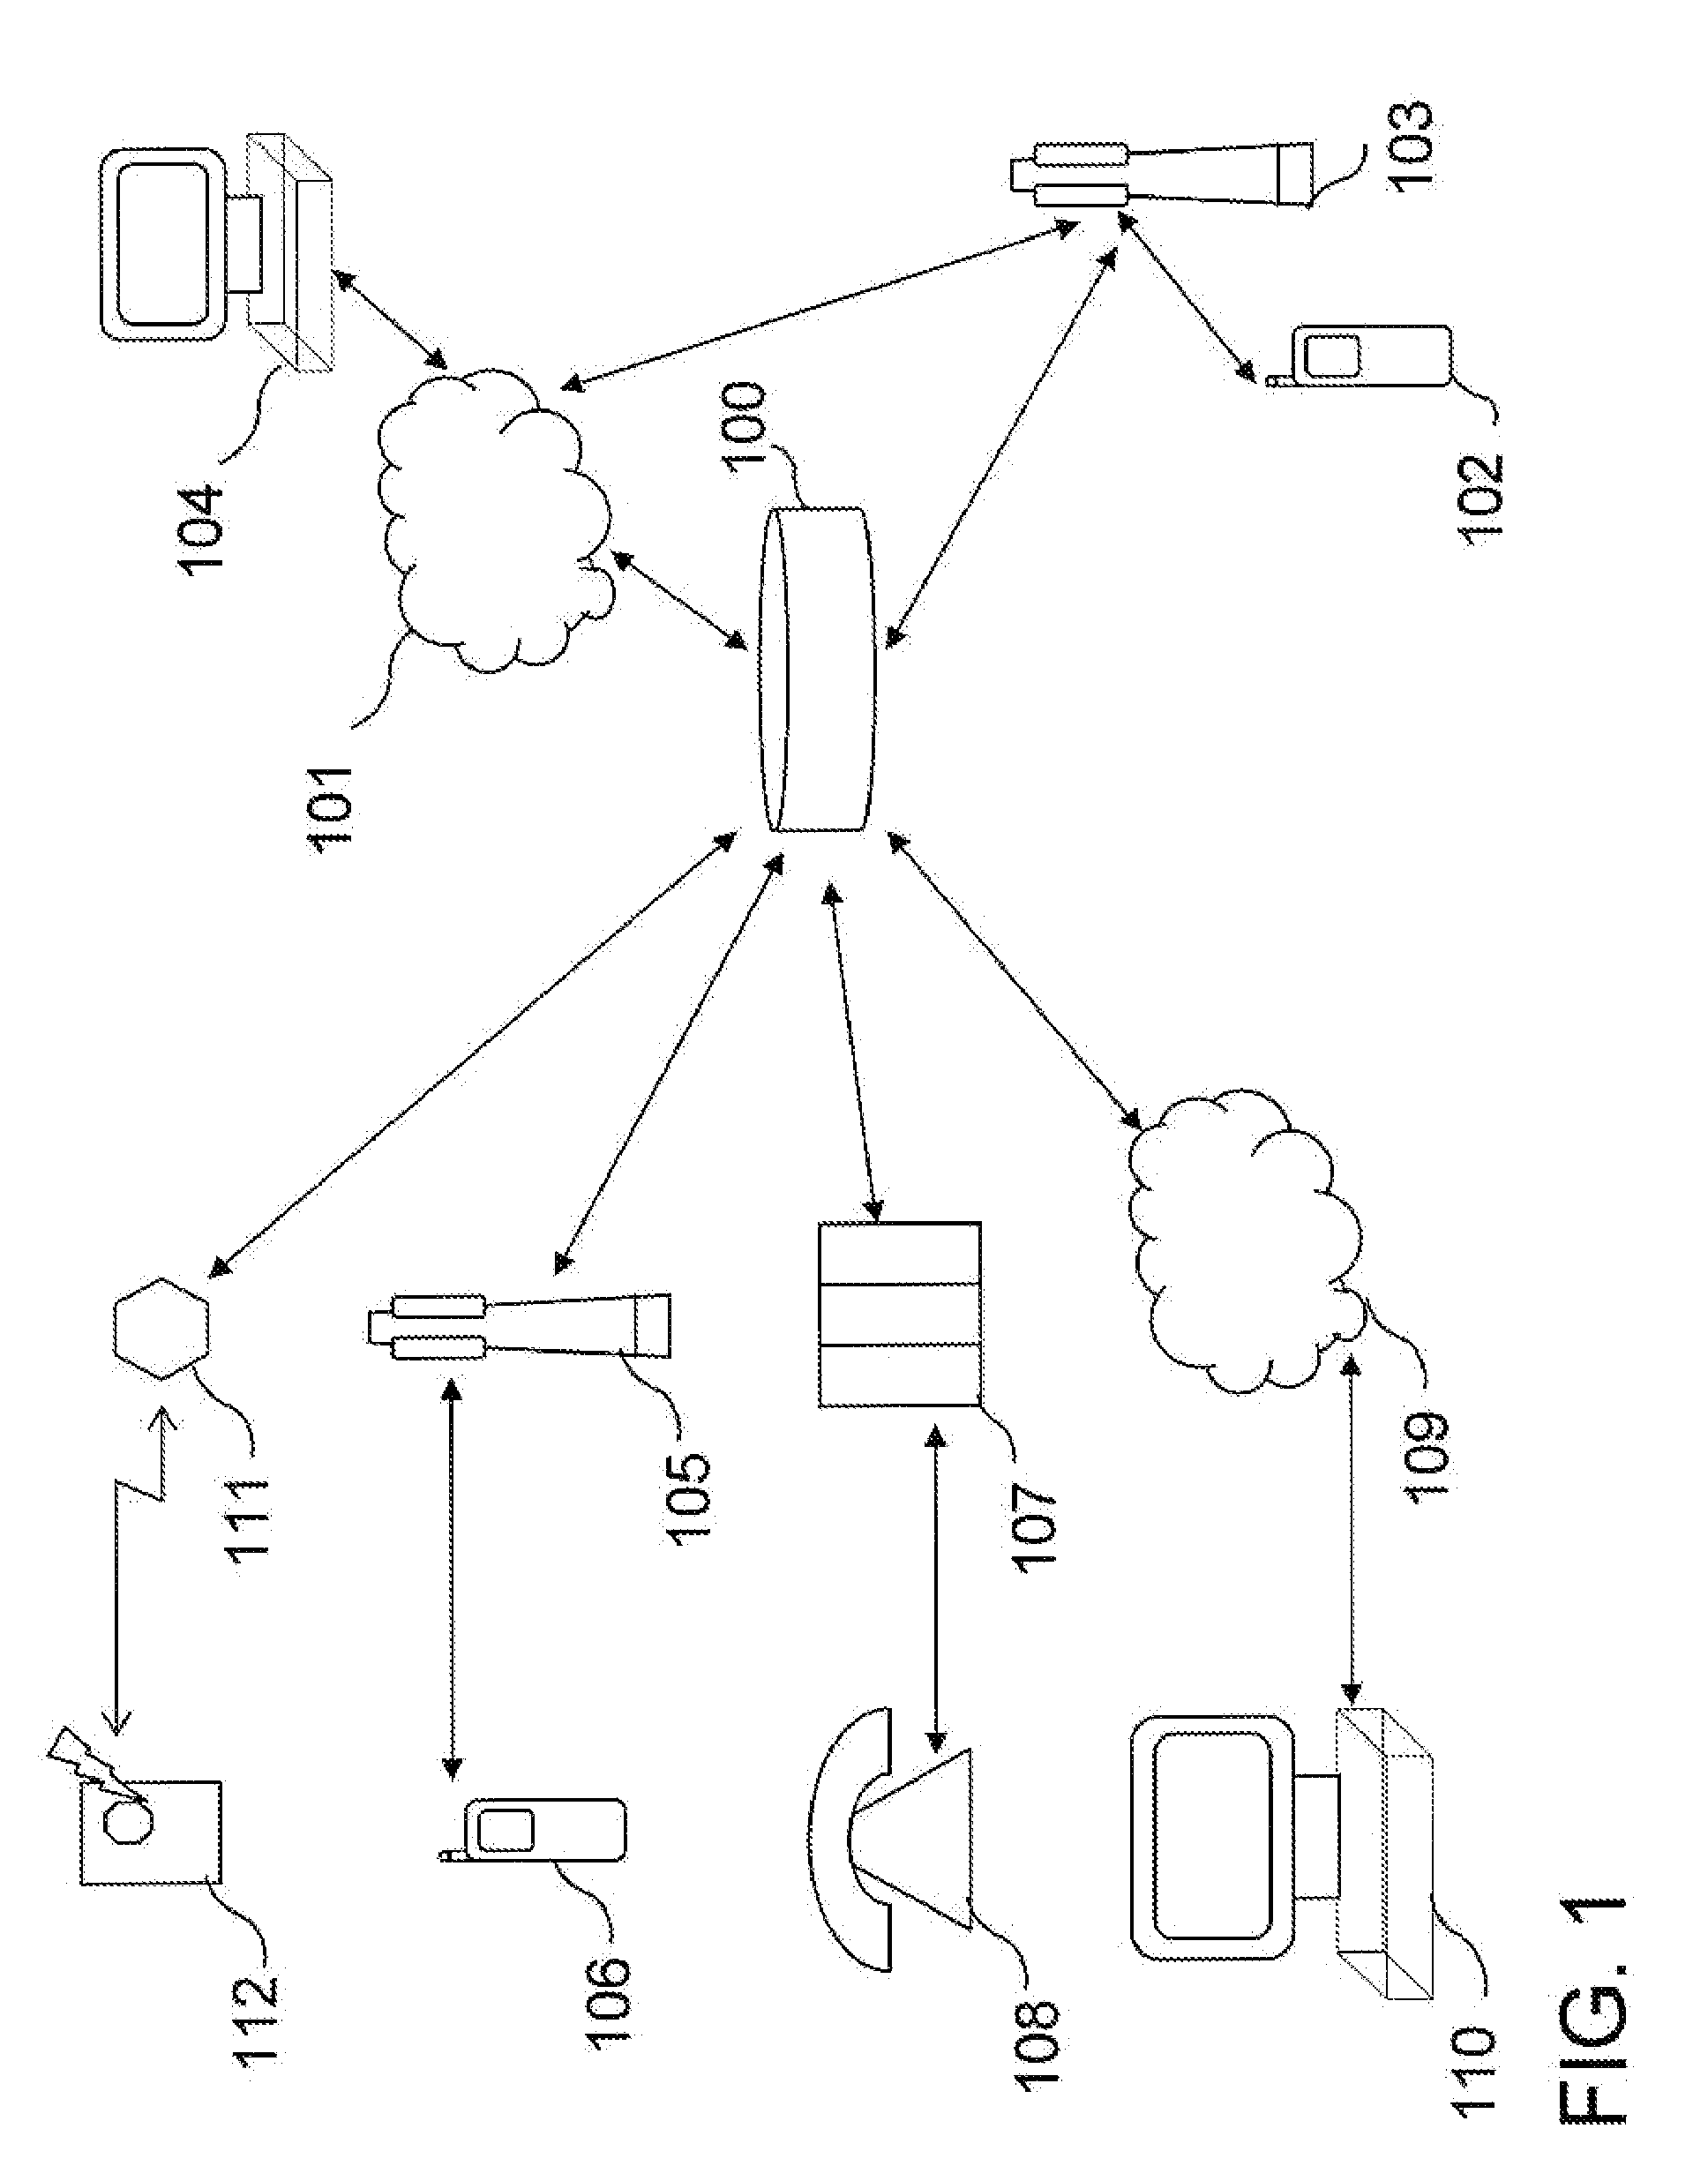 Systems and methods for operating communication processes using a personalized communication web server